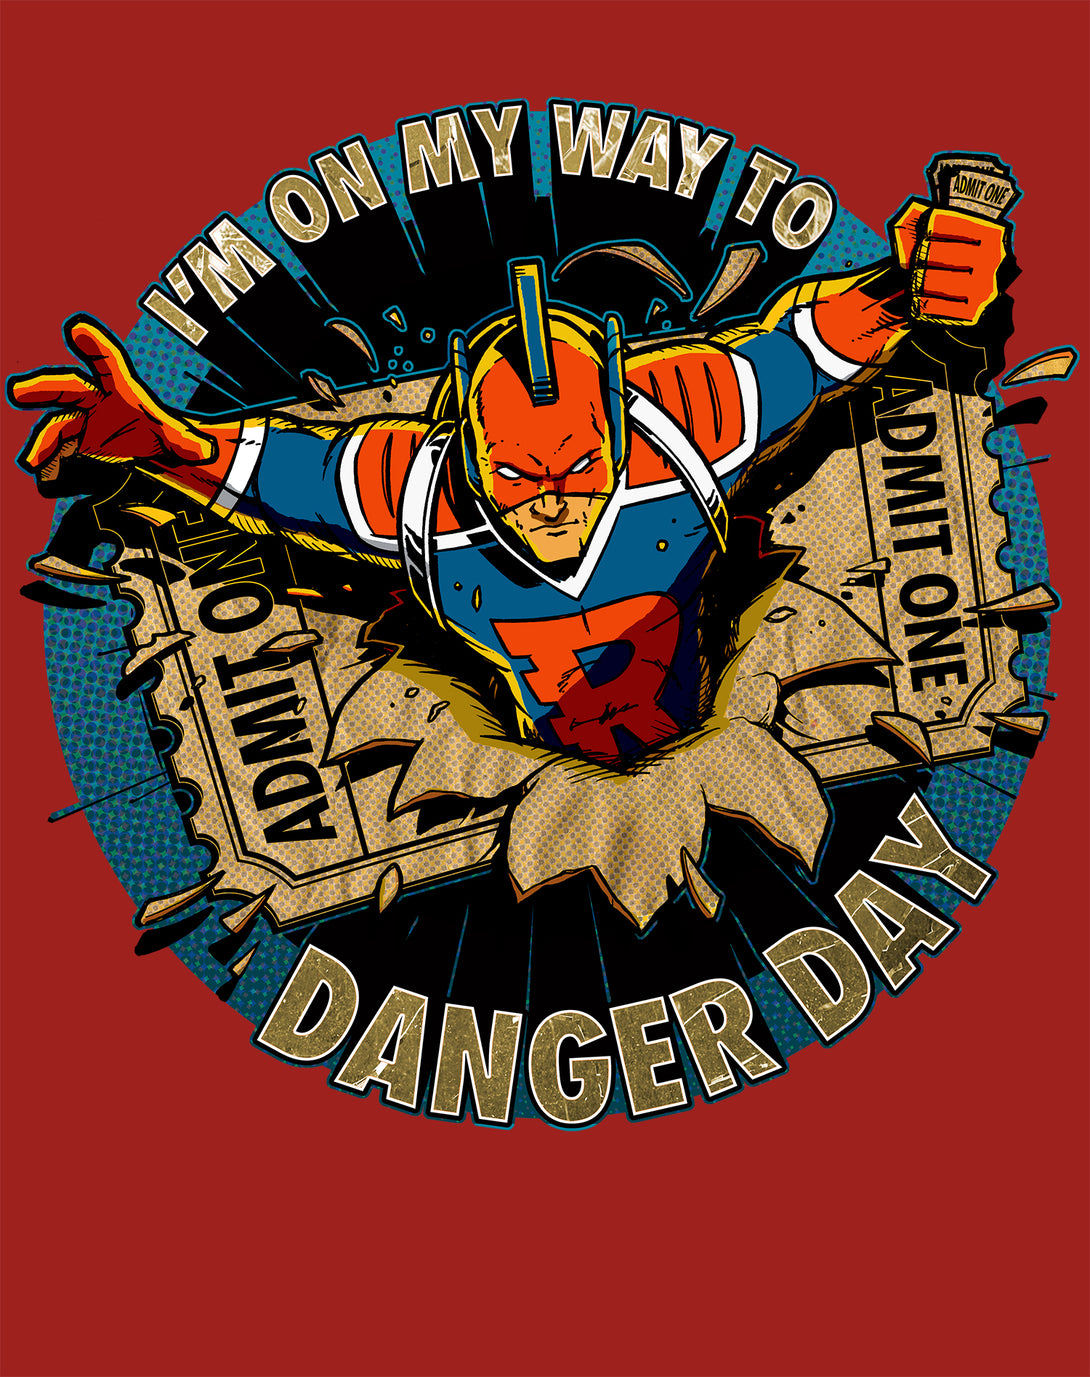 Kevin Smith View Askewniverse Danger Days Logo LDN Edition Official Men's T-Shirt Red - Urban Species Design Close Up